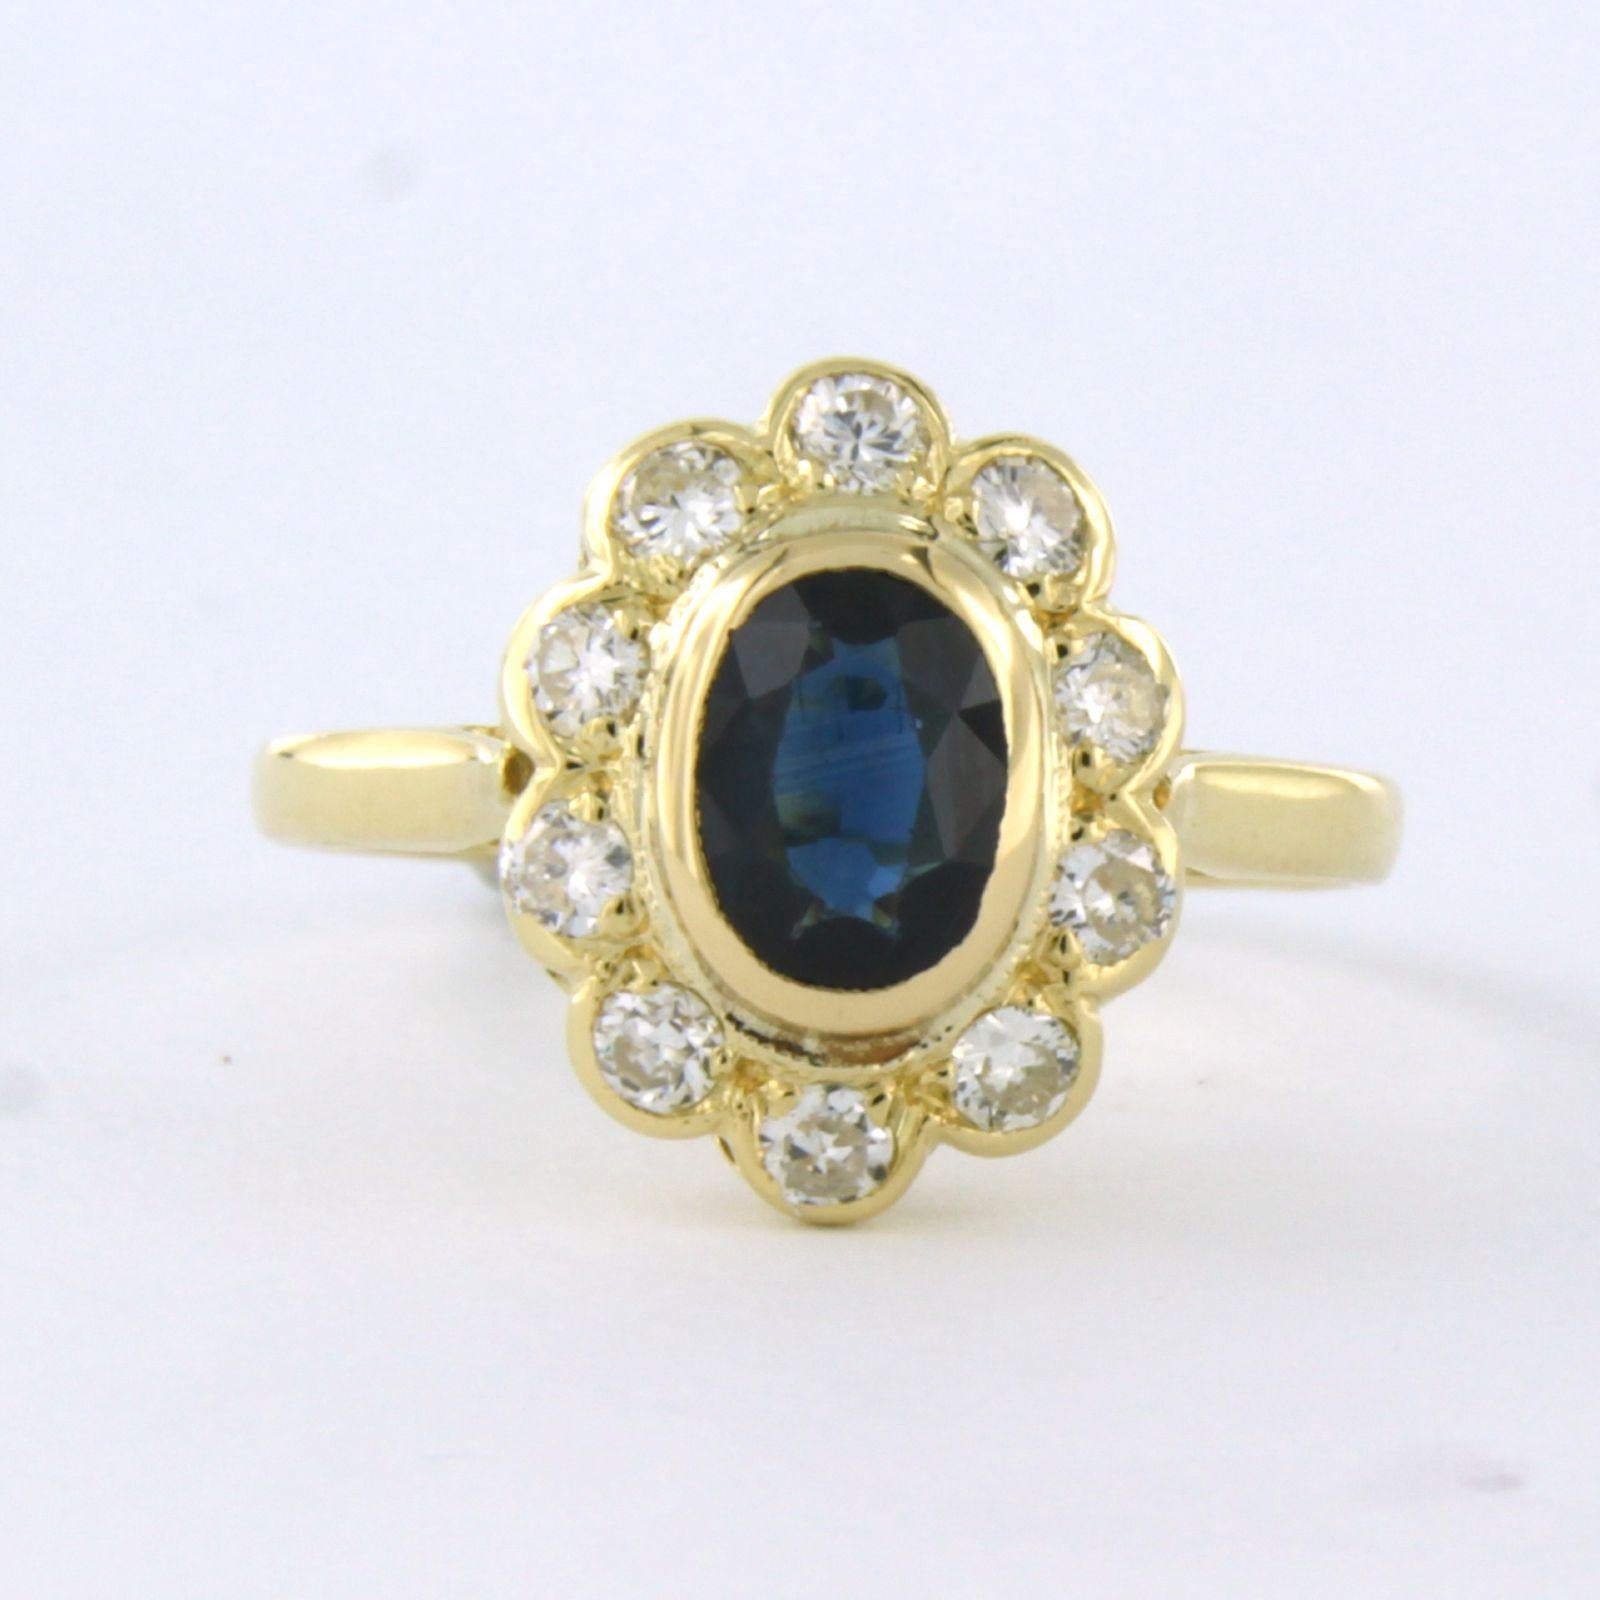 18k yellow gold ring set with sapphire and brilliant cut diamonds. 0.50ct - G/H - VS/SI - ring size U.S. 6.75 - EU. 17.25 (54)

detailed description:

the top of the ring is 1.3 cm wide by 6.2 mm high

ring size US 6.75 - EU. 17.25 (54), ring can be